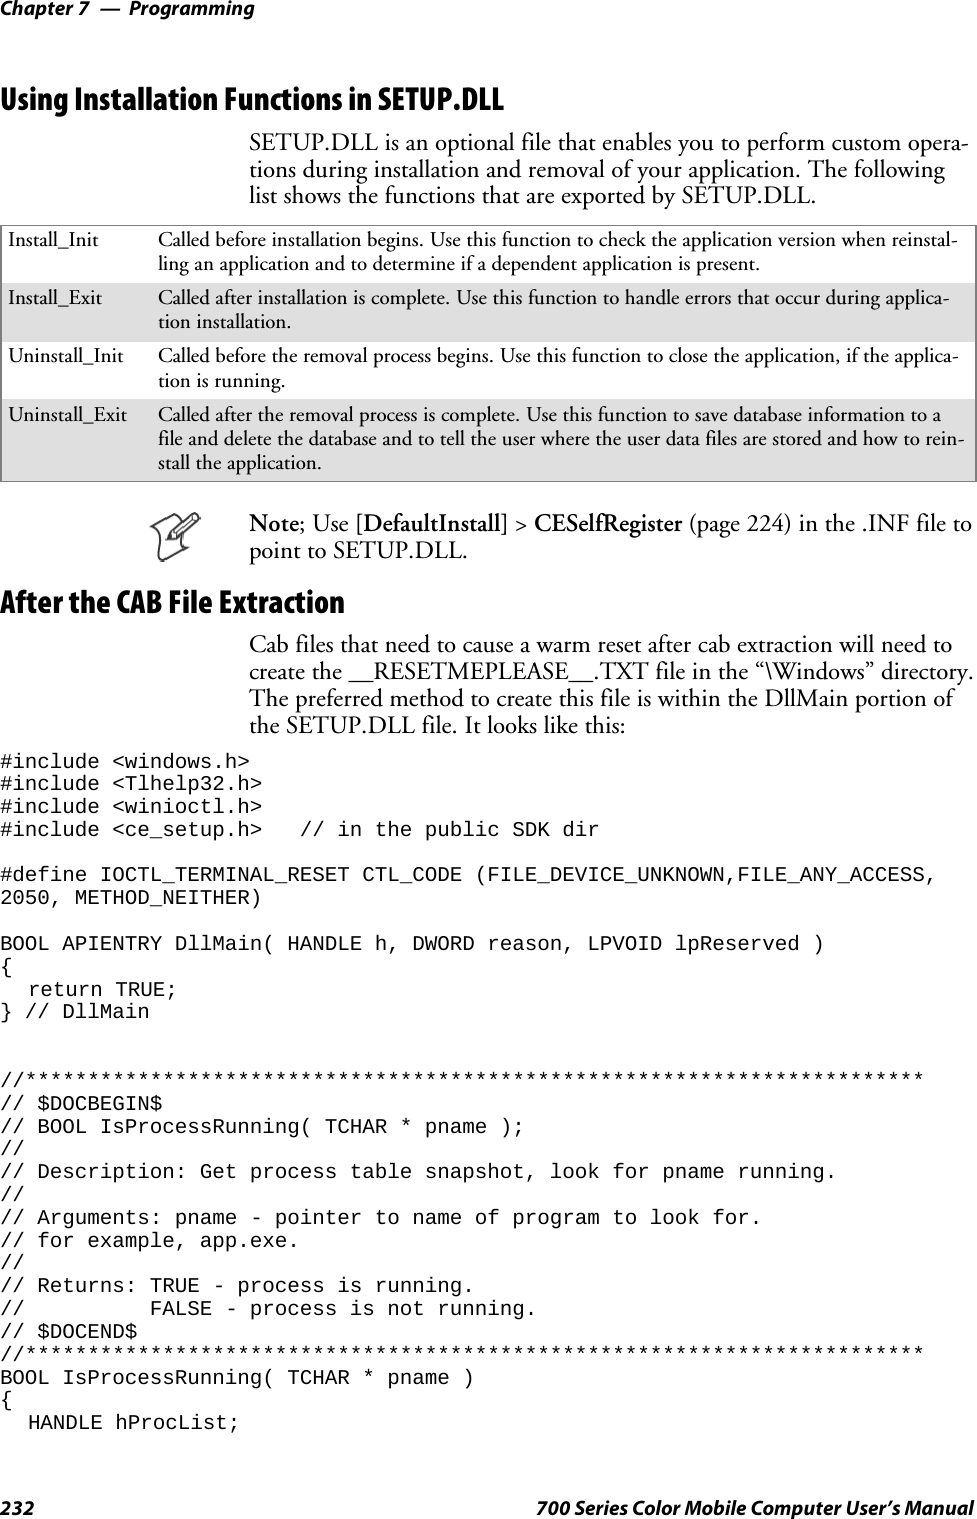 ProgrammingChapter —7232 700 Series Color Mobile Computer User’s ManualUsing Installation Functions in SETUP.DLLSETUP.DLL is an optional file that enables you to perform custom opera-tions during installation and removal of your application. The followinglist shows the functions that are exported by SETUP.DLL.Install_Init Called before installation begins. Use this function to check the application version when reinstal-ling an application and to determine if a dependent application is present.Install_Exit Called after installation is complete. Use this function to handle errors that occur during applica-tion installation.Uninstall_Init Called before the removal process begins. Use this function to close the application, if the applica-tion is running.Uninstall_Exit Called after the removal process is complete. Use this function to save database information to afile and delete the database and to tell the user where the user data files are stored and how to rein-stall the application.Note;Use[DefaultInstall] &gt;CESelfRegister (page 224) in the .INF file topoint to SETUP.DLL.After the CAB File ExtractionCab files that need to cause a warm reset after cab extraction will need tocreate the __RESETMEPLEASE__.TXT file in the “\Windows” directory.The preferred method to create this file is within the DllMain portion oftheSETUP.DLLfile.Itlookslikethis:#include &lt;windows.h&gt;#include &lt;Tlhelp32.h&gt;#include &lt;winioctl.h&gt;#include &lt;ce_setup.h&gt; // in the public SDK dir#define IOCTL_TERMINAL_RESET CTL_CODE (FILE_DEVICE_UNKNOWN,FILE_ANY_ACCESS,2050, METHOD_NEITHER)BOOL APIENTRY DllMain( HANDLE h, DWORD reason, LPVOID lpReserved ){return TRUE;} // DllMain//************************************************************************// $DOCBEGIN$// BOOL IsProcessRunning( TCHAR * pname );//// Description: Get process table snapshot, look for pname running.//// Arguments: pname - pointer to name of program to look for.// for example, app.exe.//// Returns: TRUE - process is running.// FALSE - process is not running.// $DOCEND$//************************************************************************BOOL IsProcessRunning( TCHAR * pname ){HANDLE hProcList;